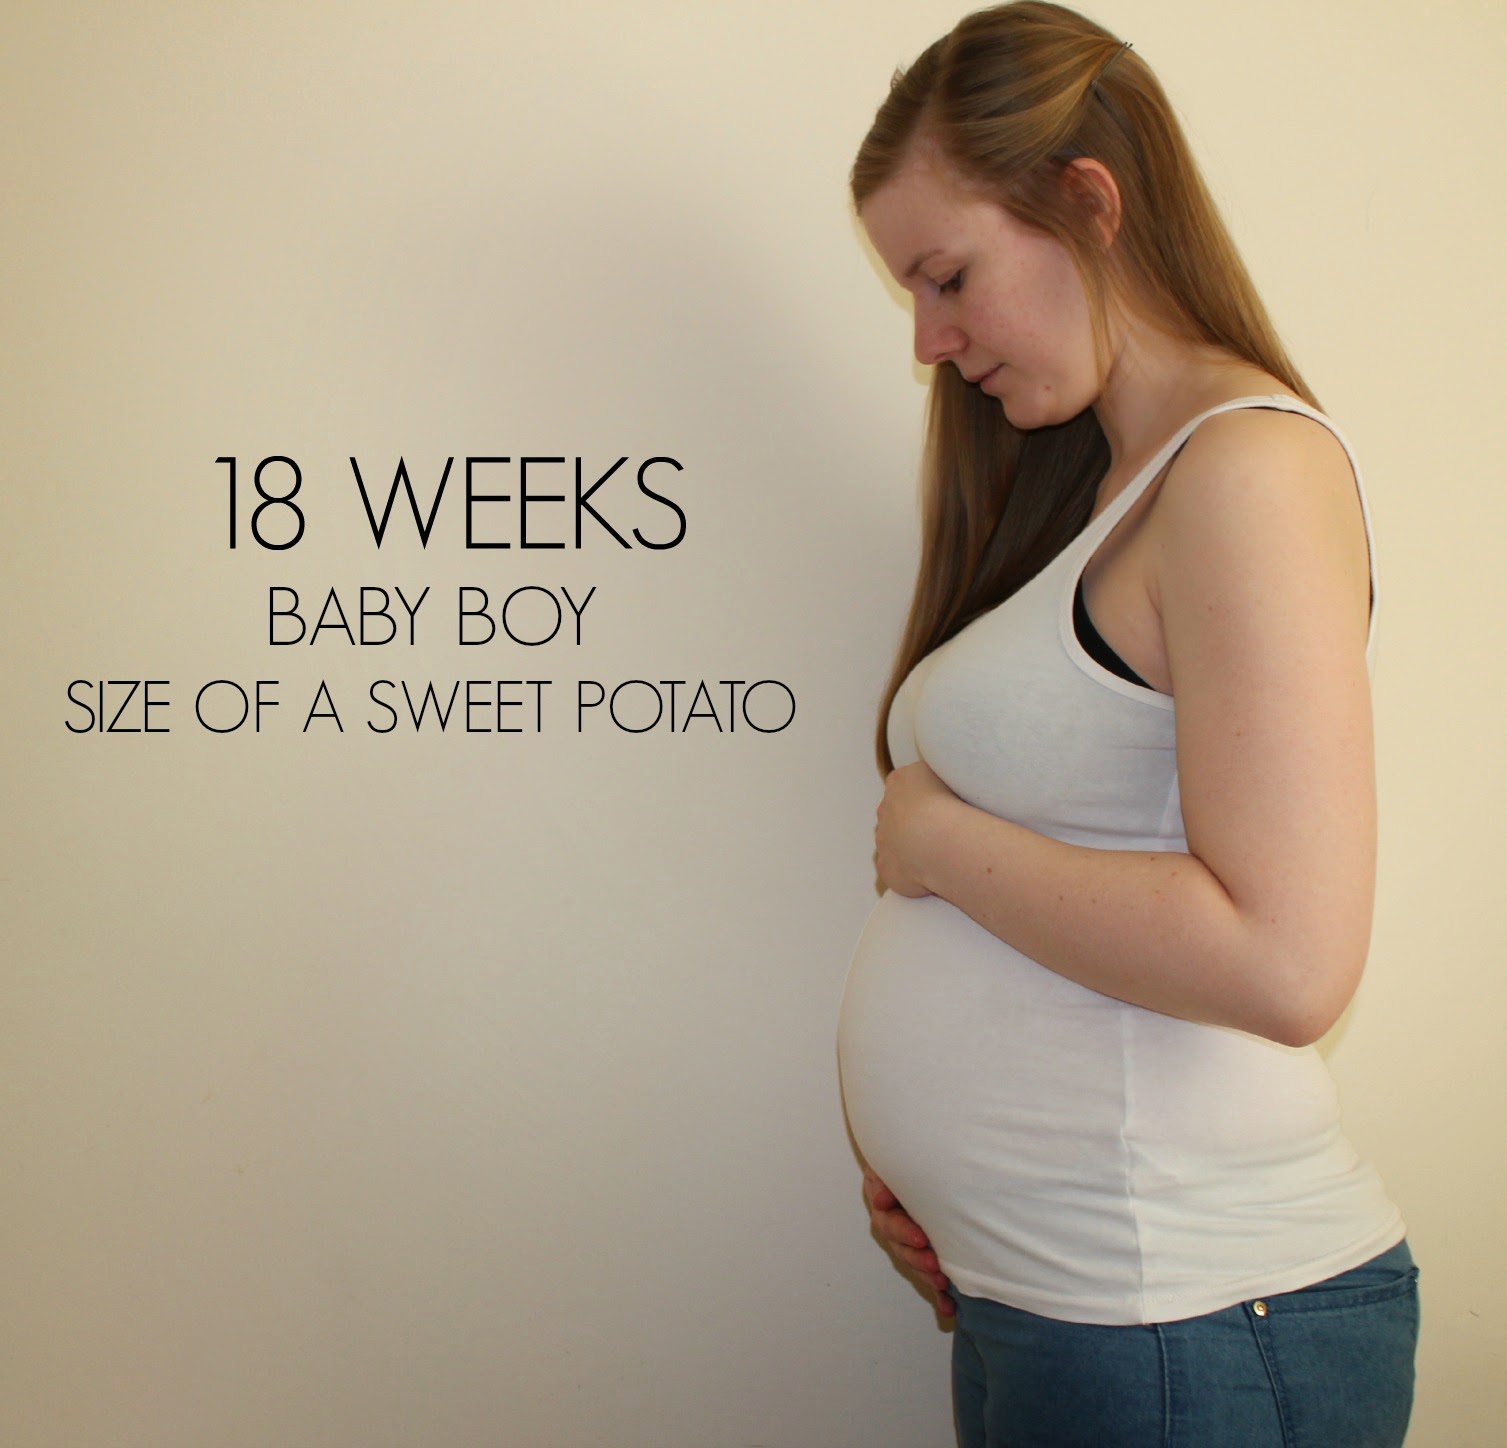 How Developed Is My Baby At 18 Weeks Pregnant